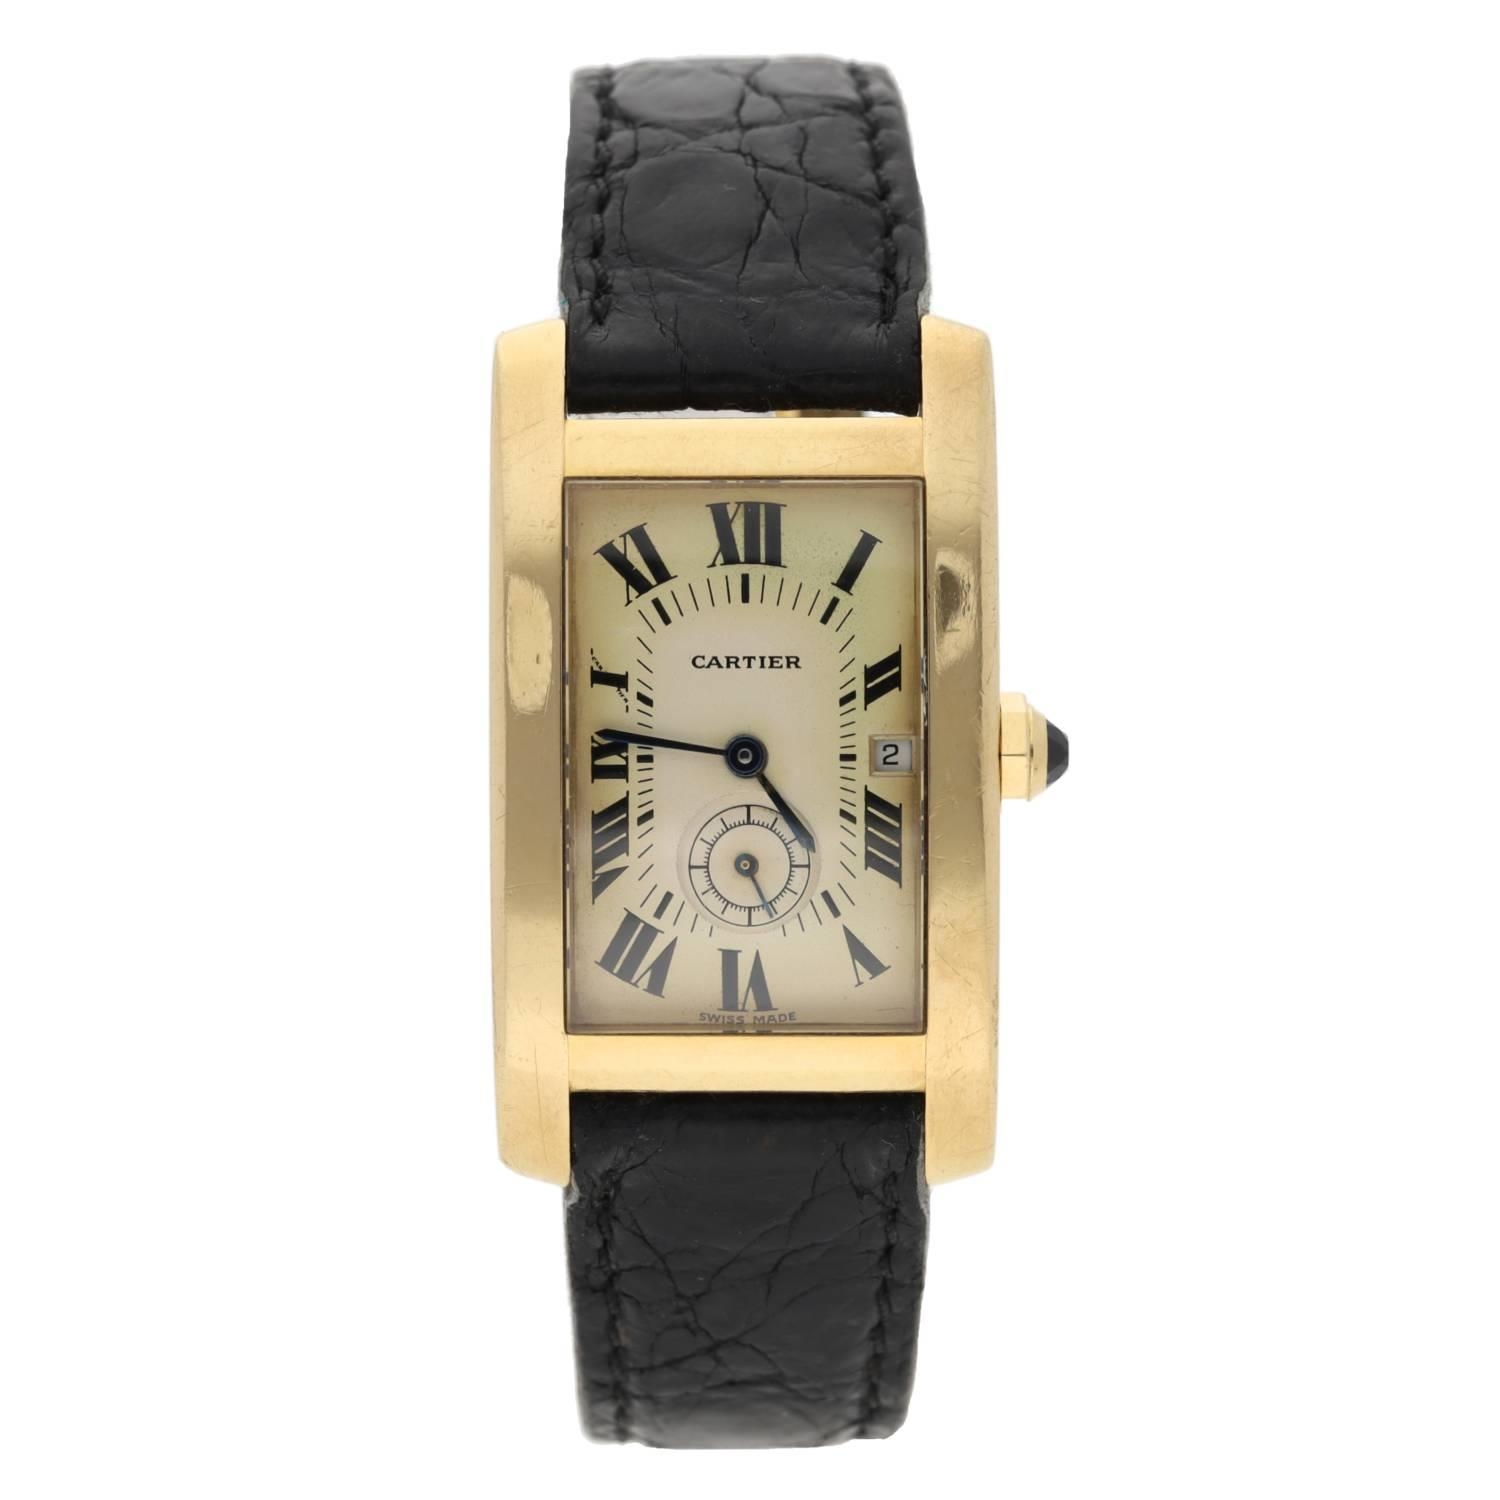 Cartier Tank Américane 18ct wristwatch, reference no. 8012905, serial no. 0005xx, silvered dial with